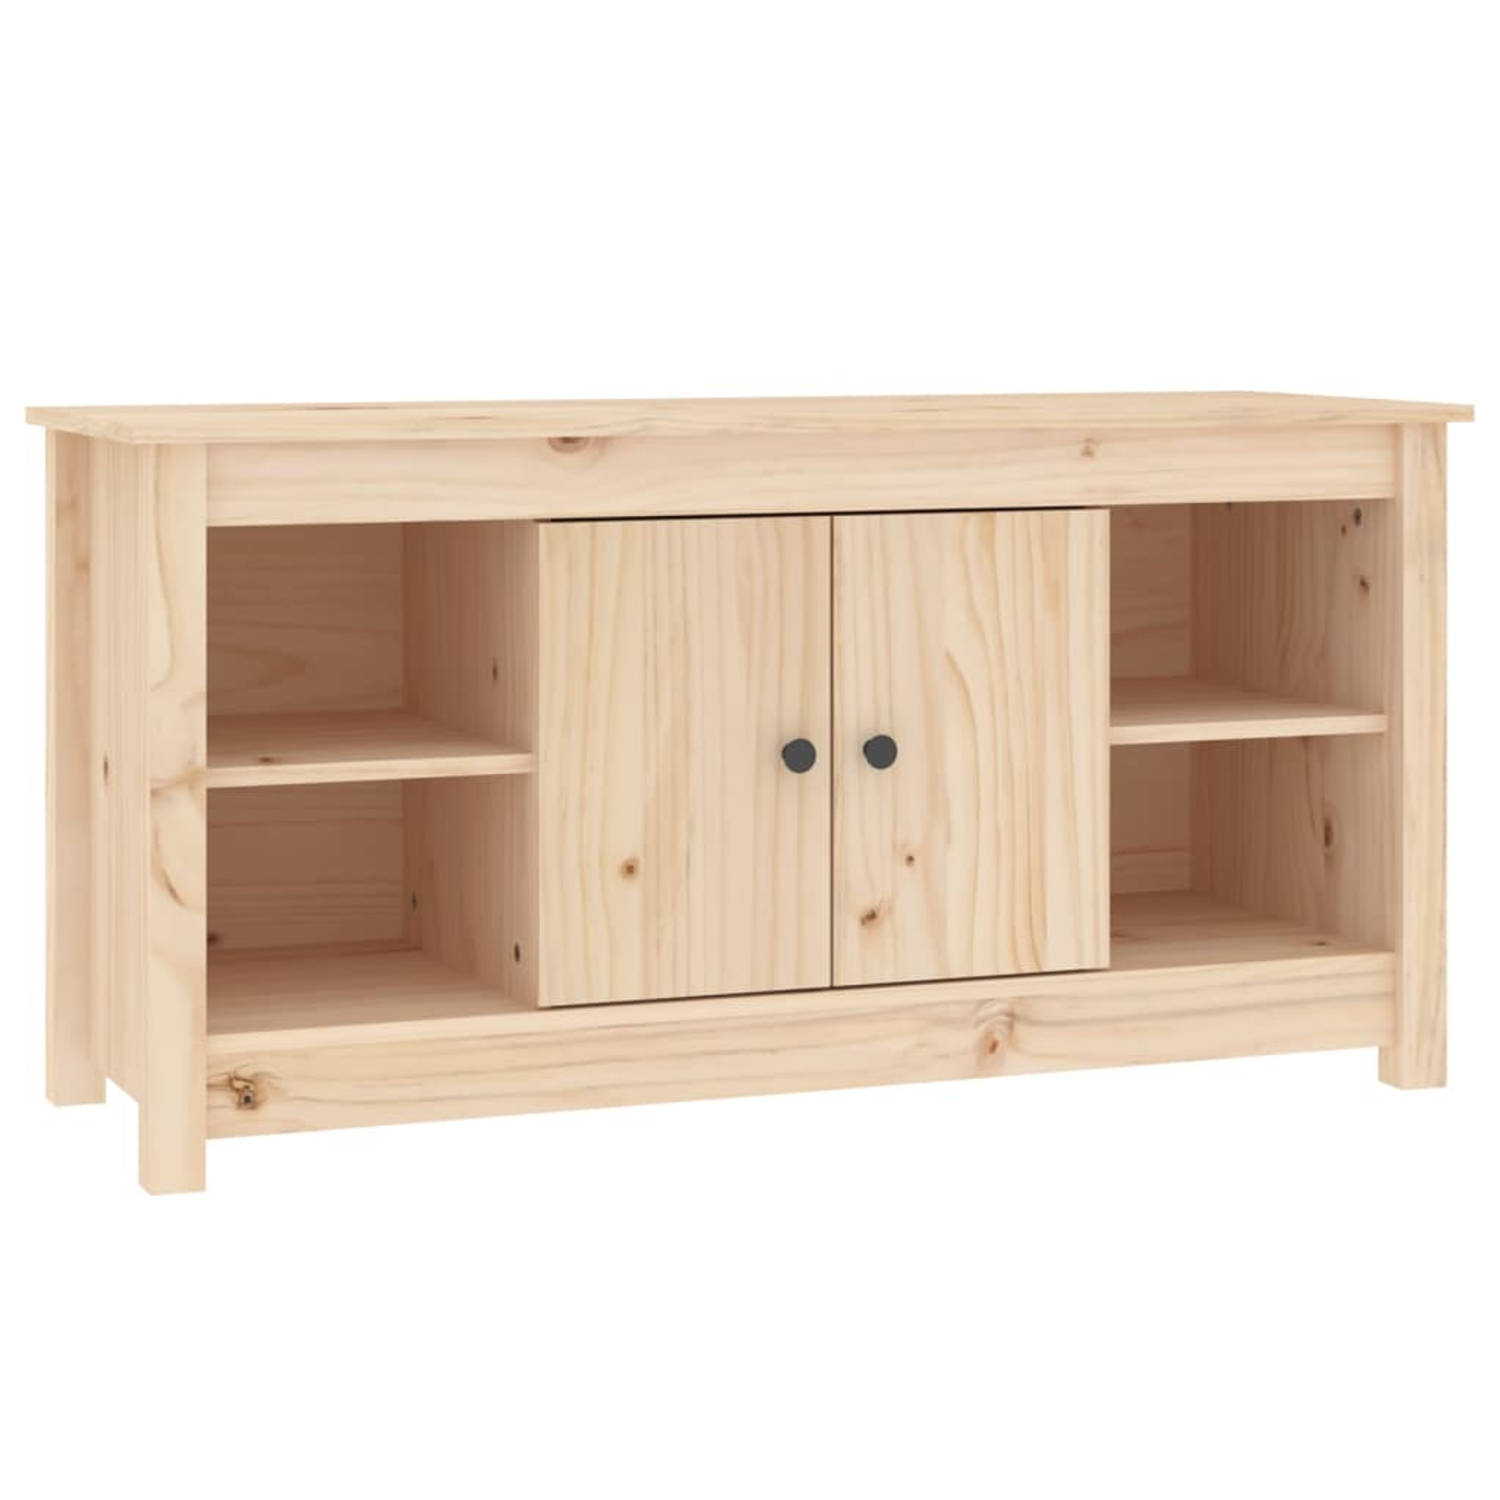 The Living Store TV-kast Massief Grenenhout - 103 x 36.5 x 52 cm